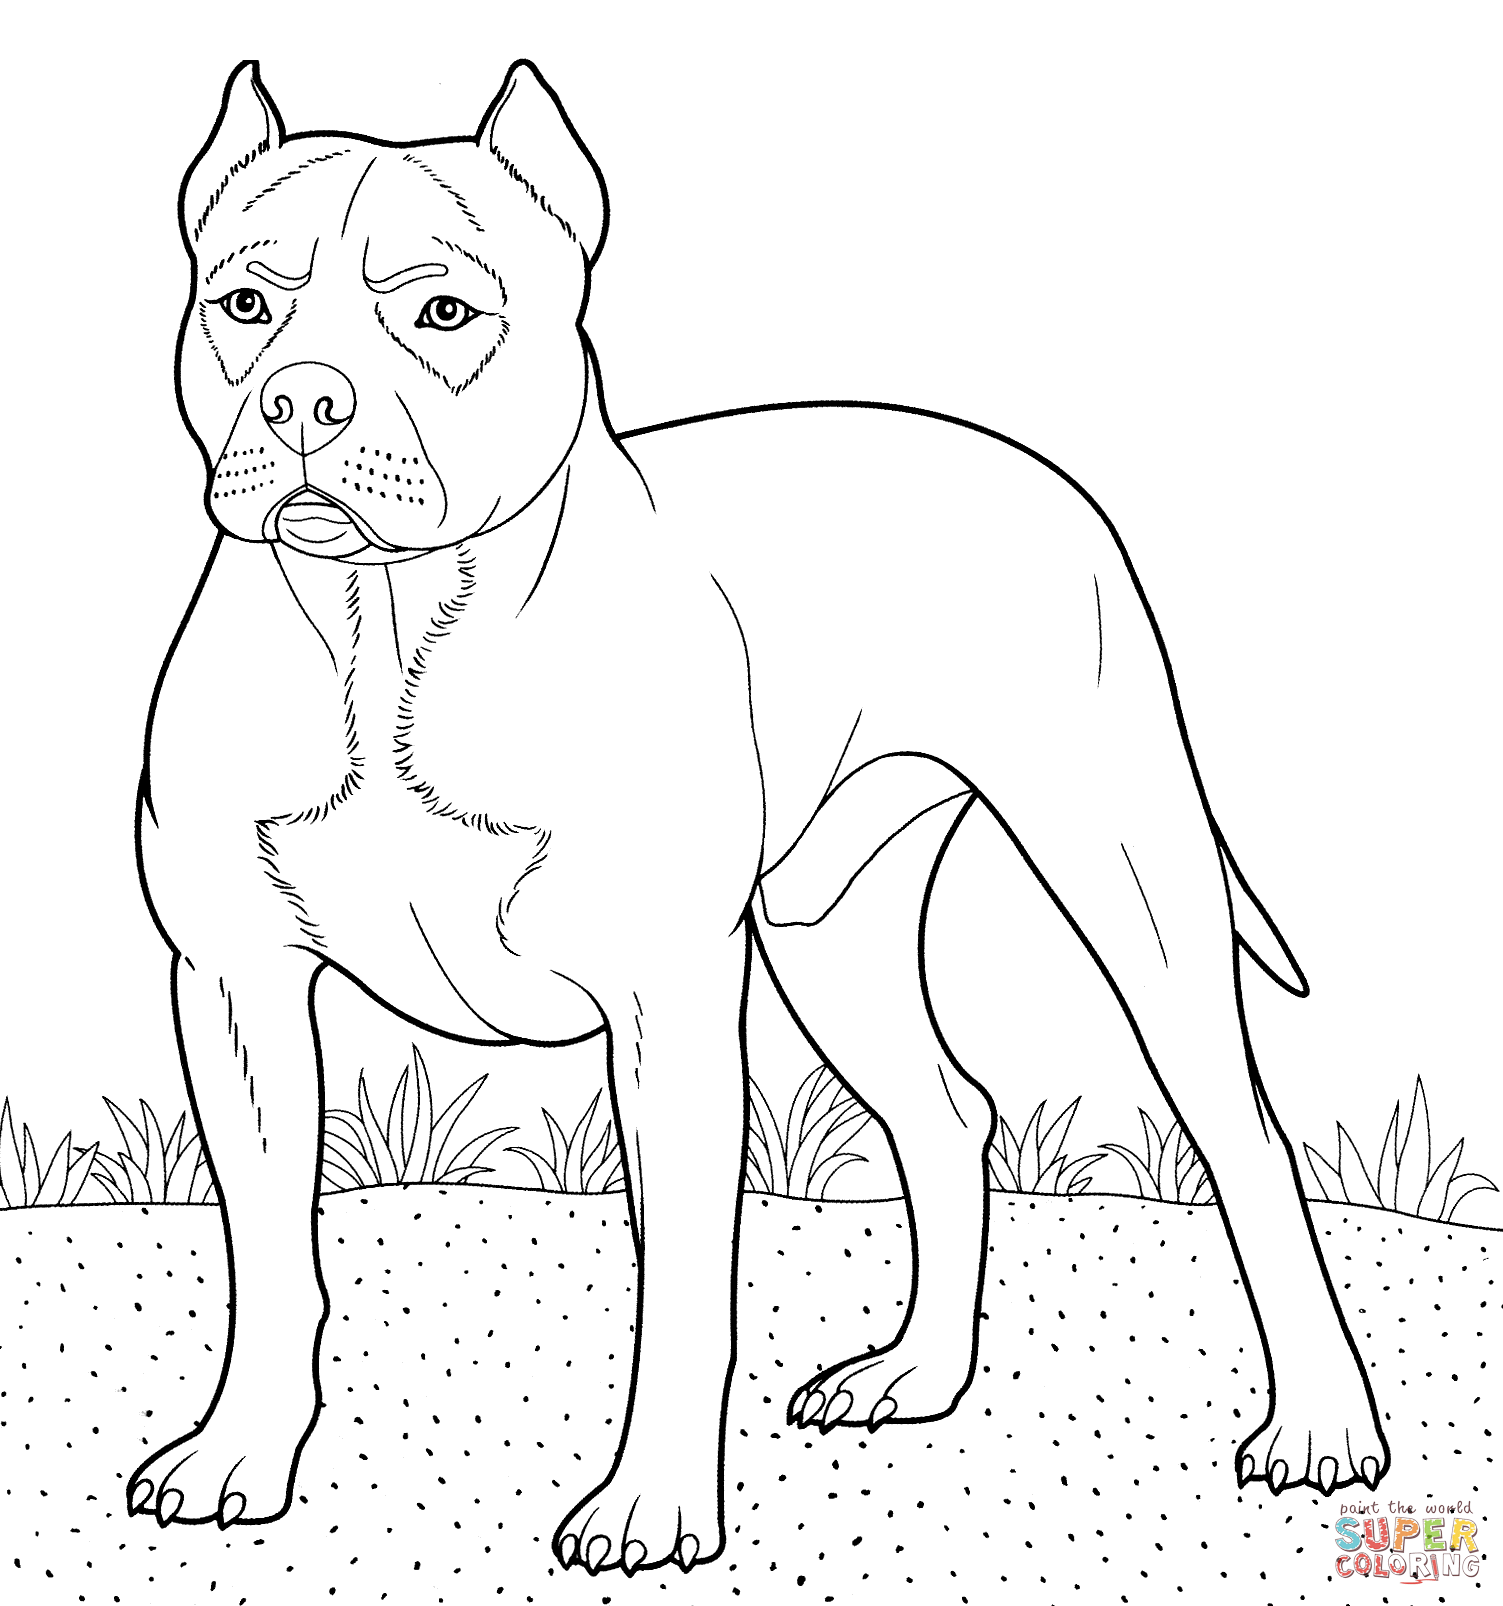 pitbull-on-grass-coloring-page-pitbull-pit-seekpng-webstockreview